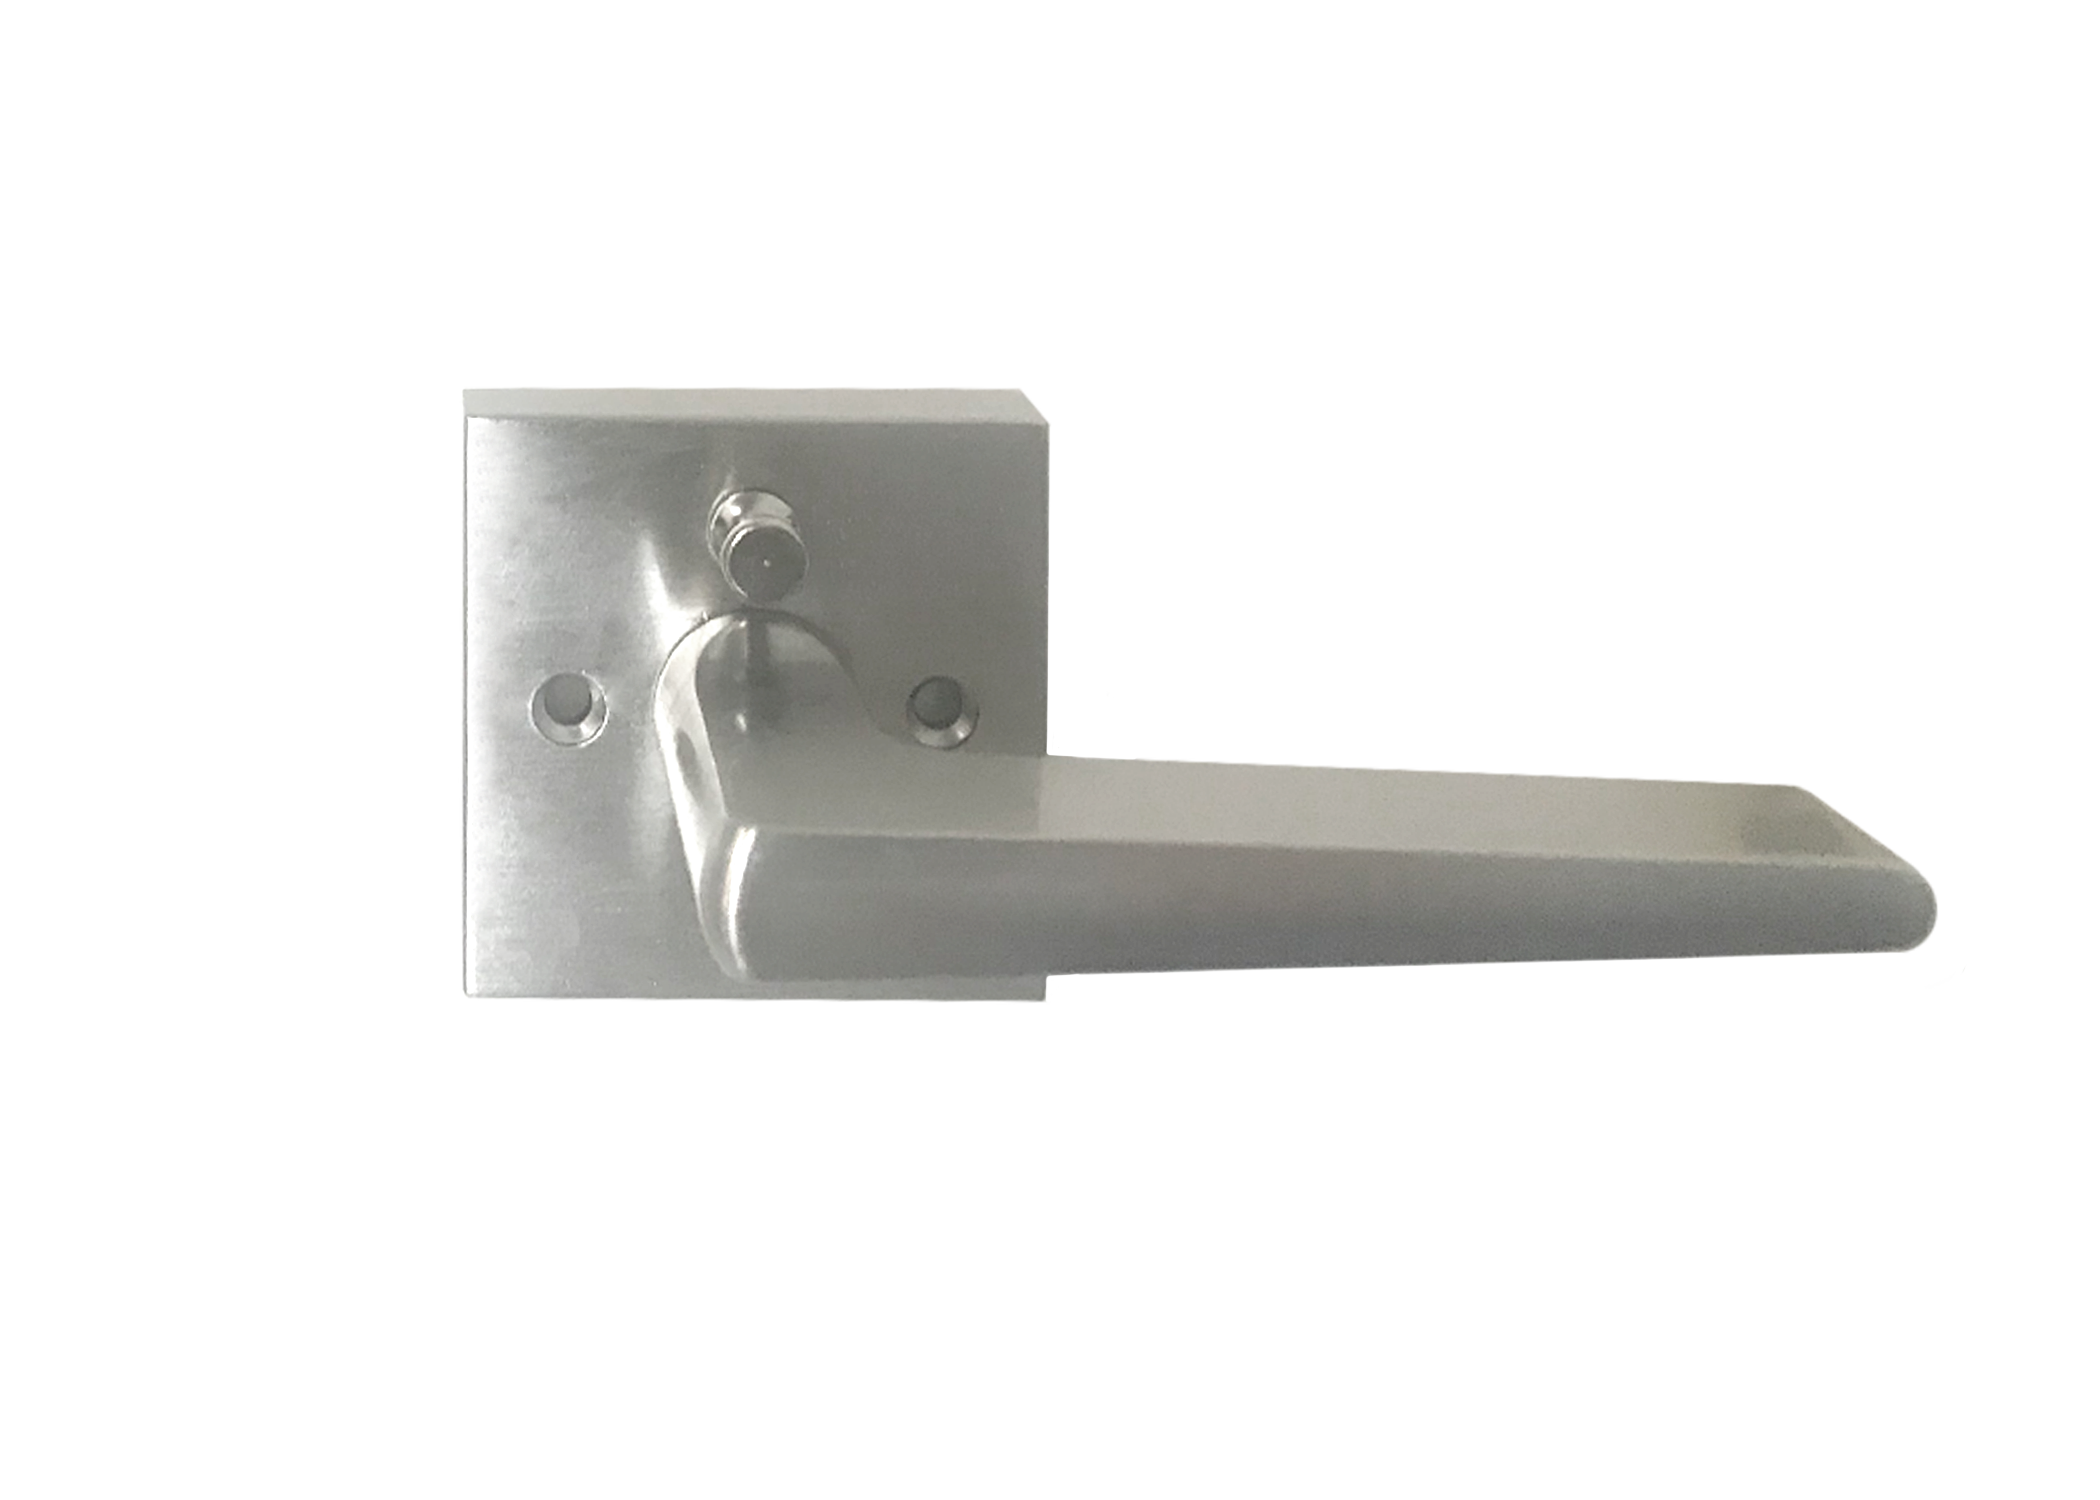 Brushed nickel privacy lever